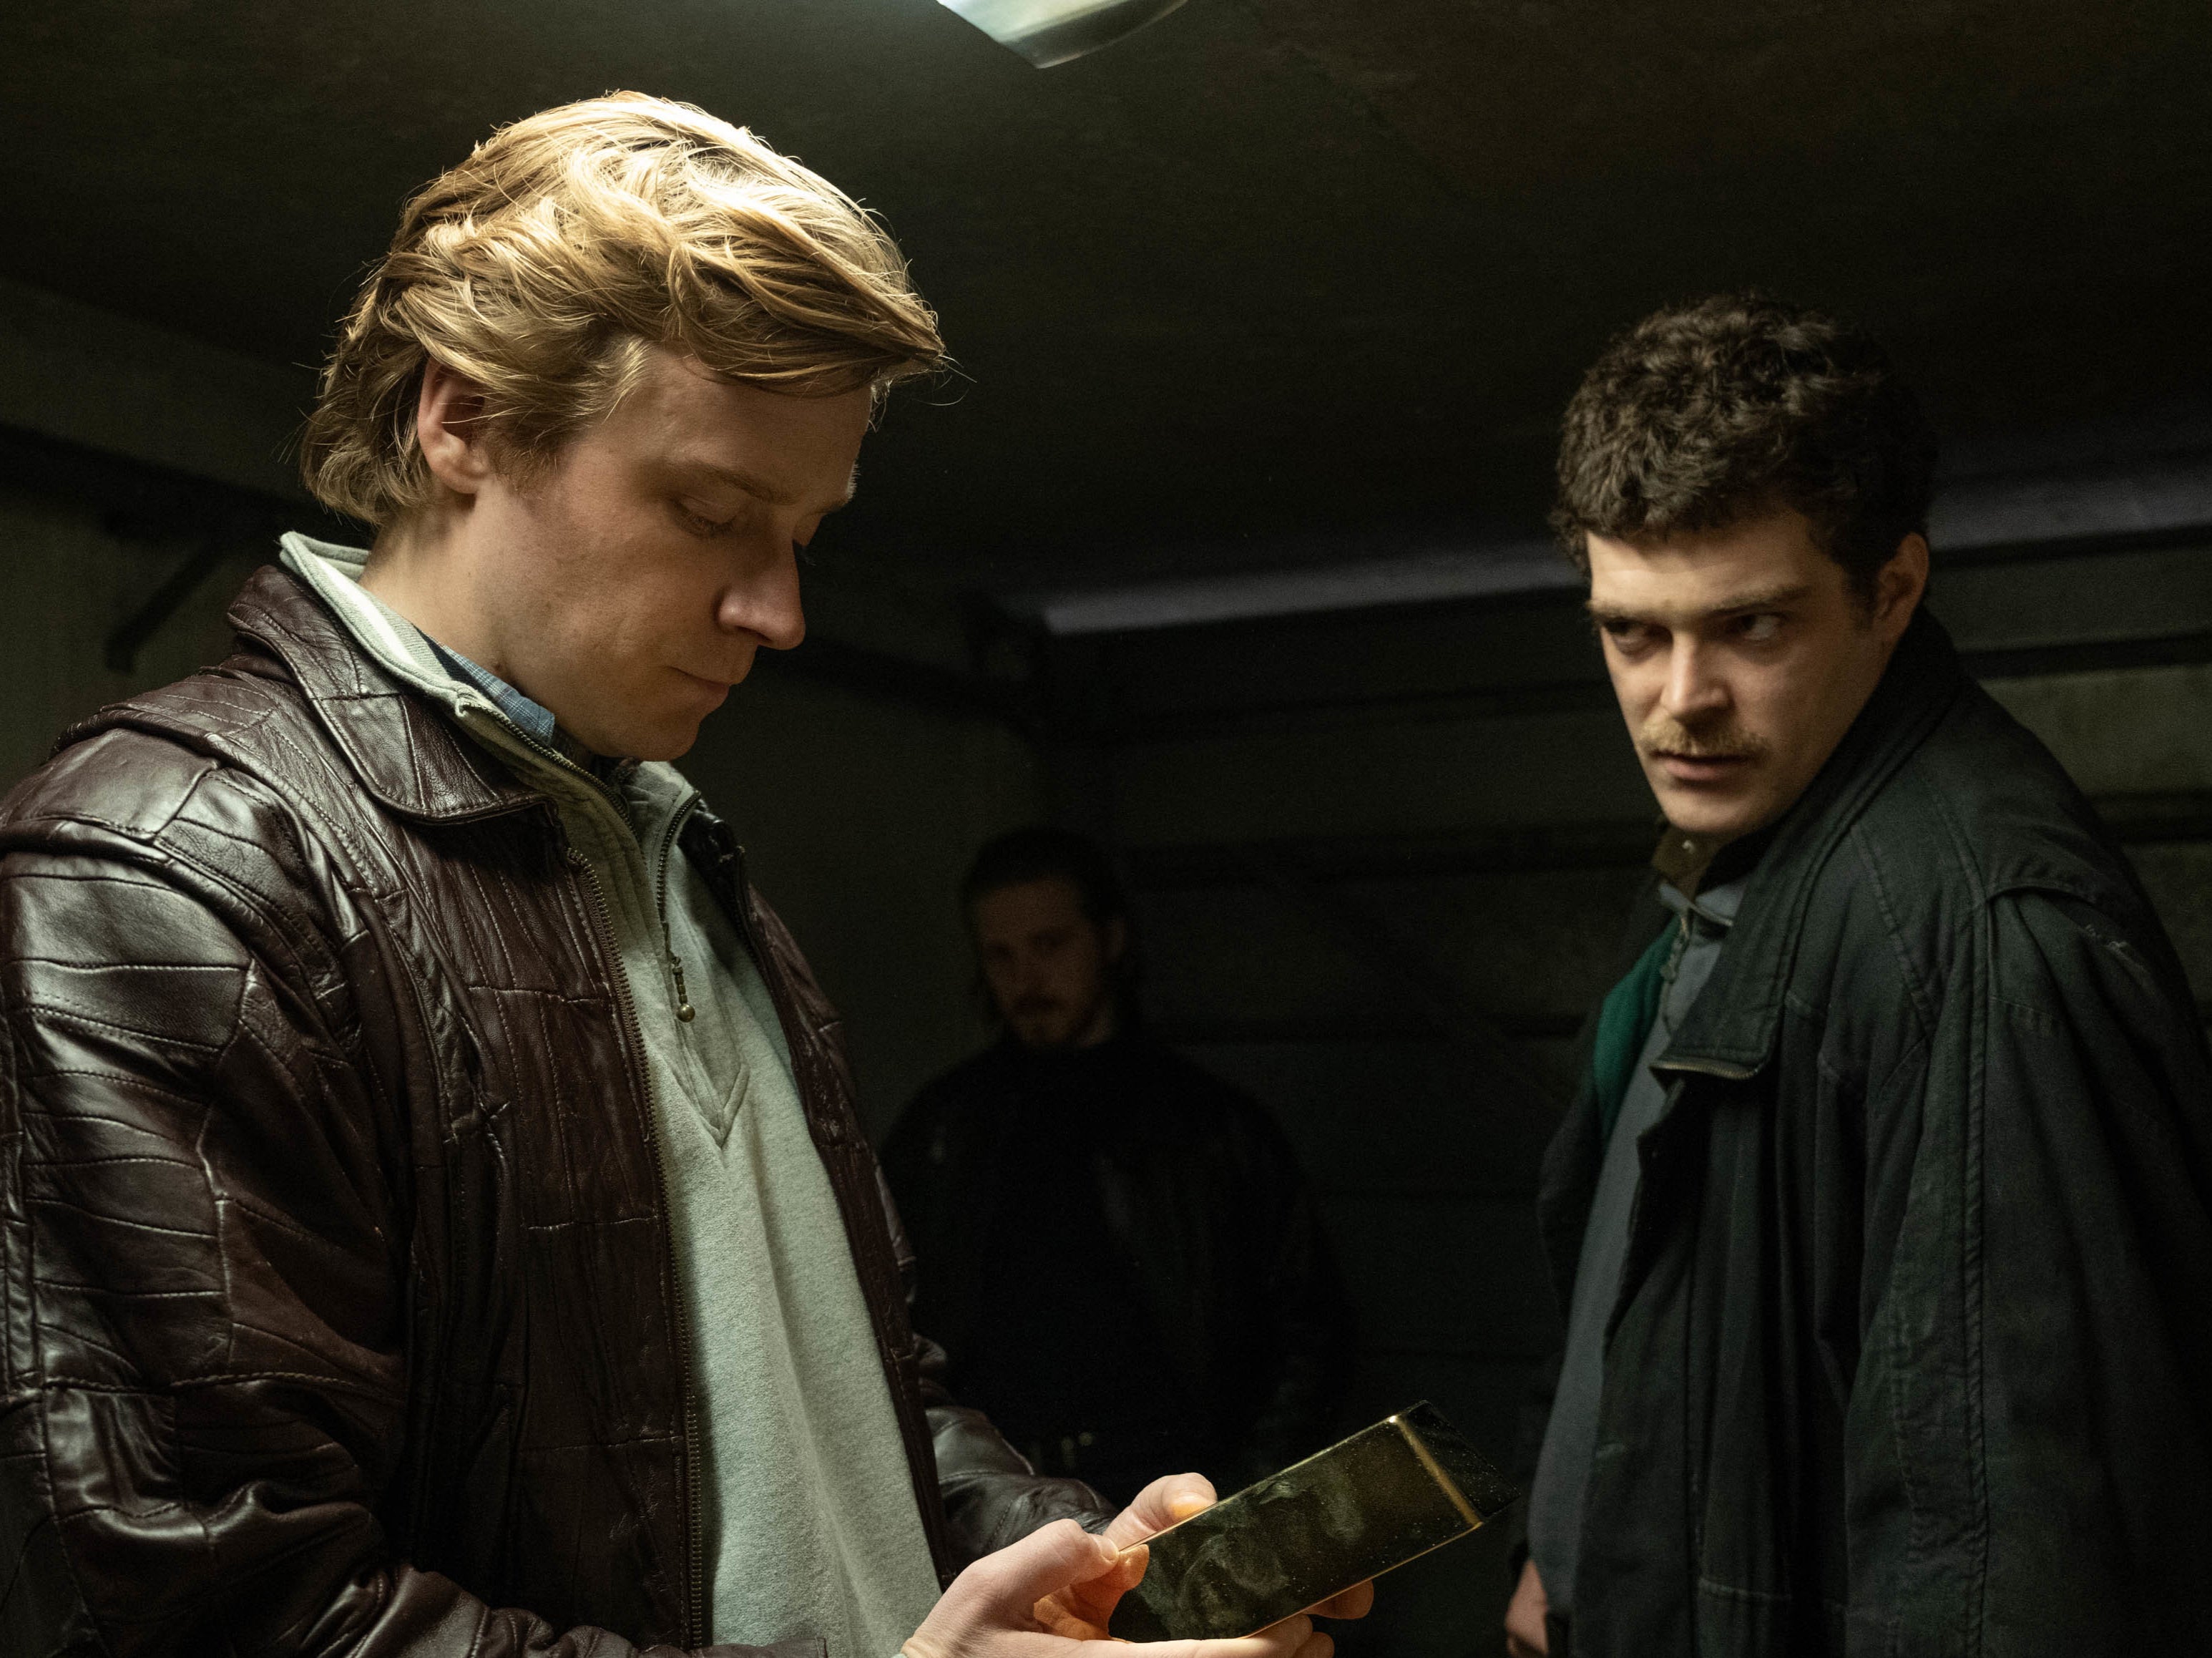 ‘The Gold’ dramatises the sensational Brink's-Mat robbery